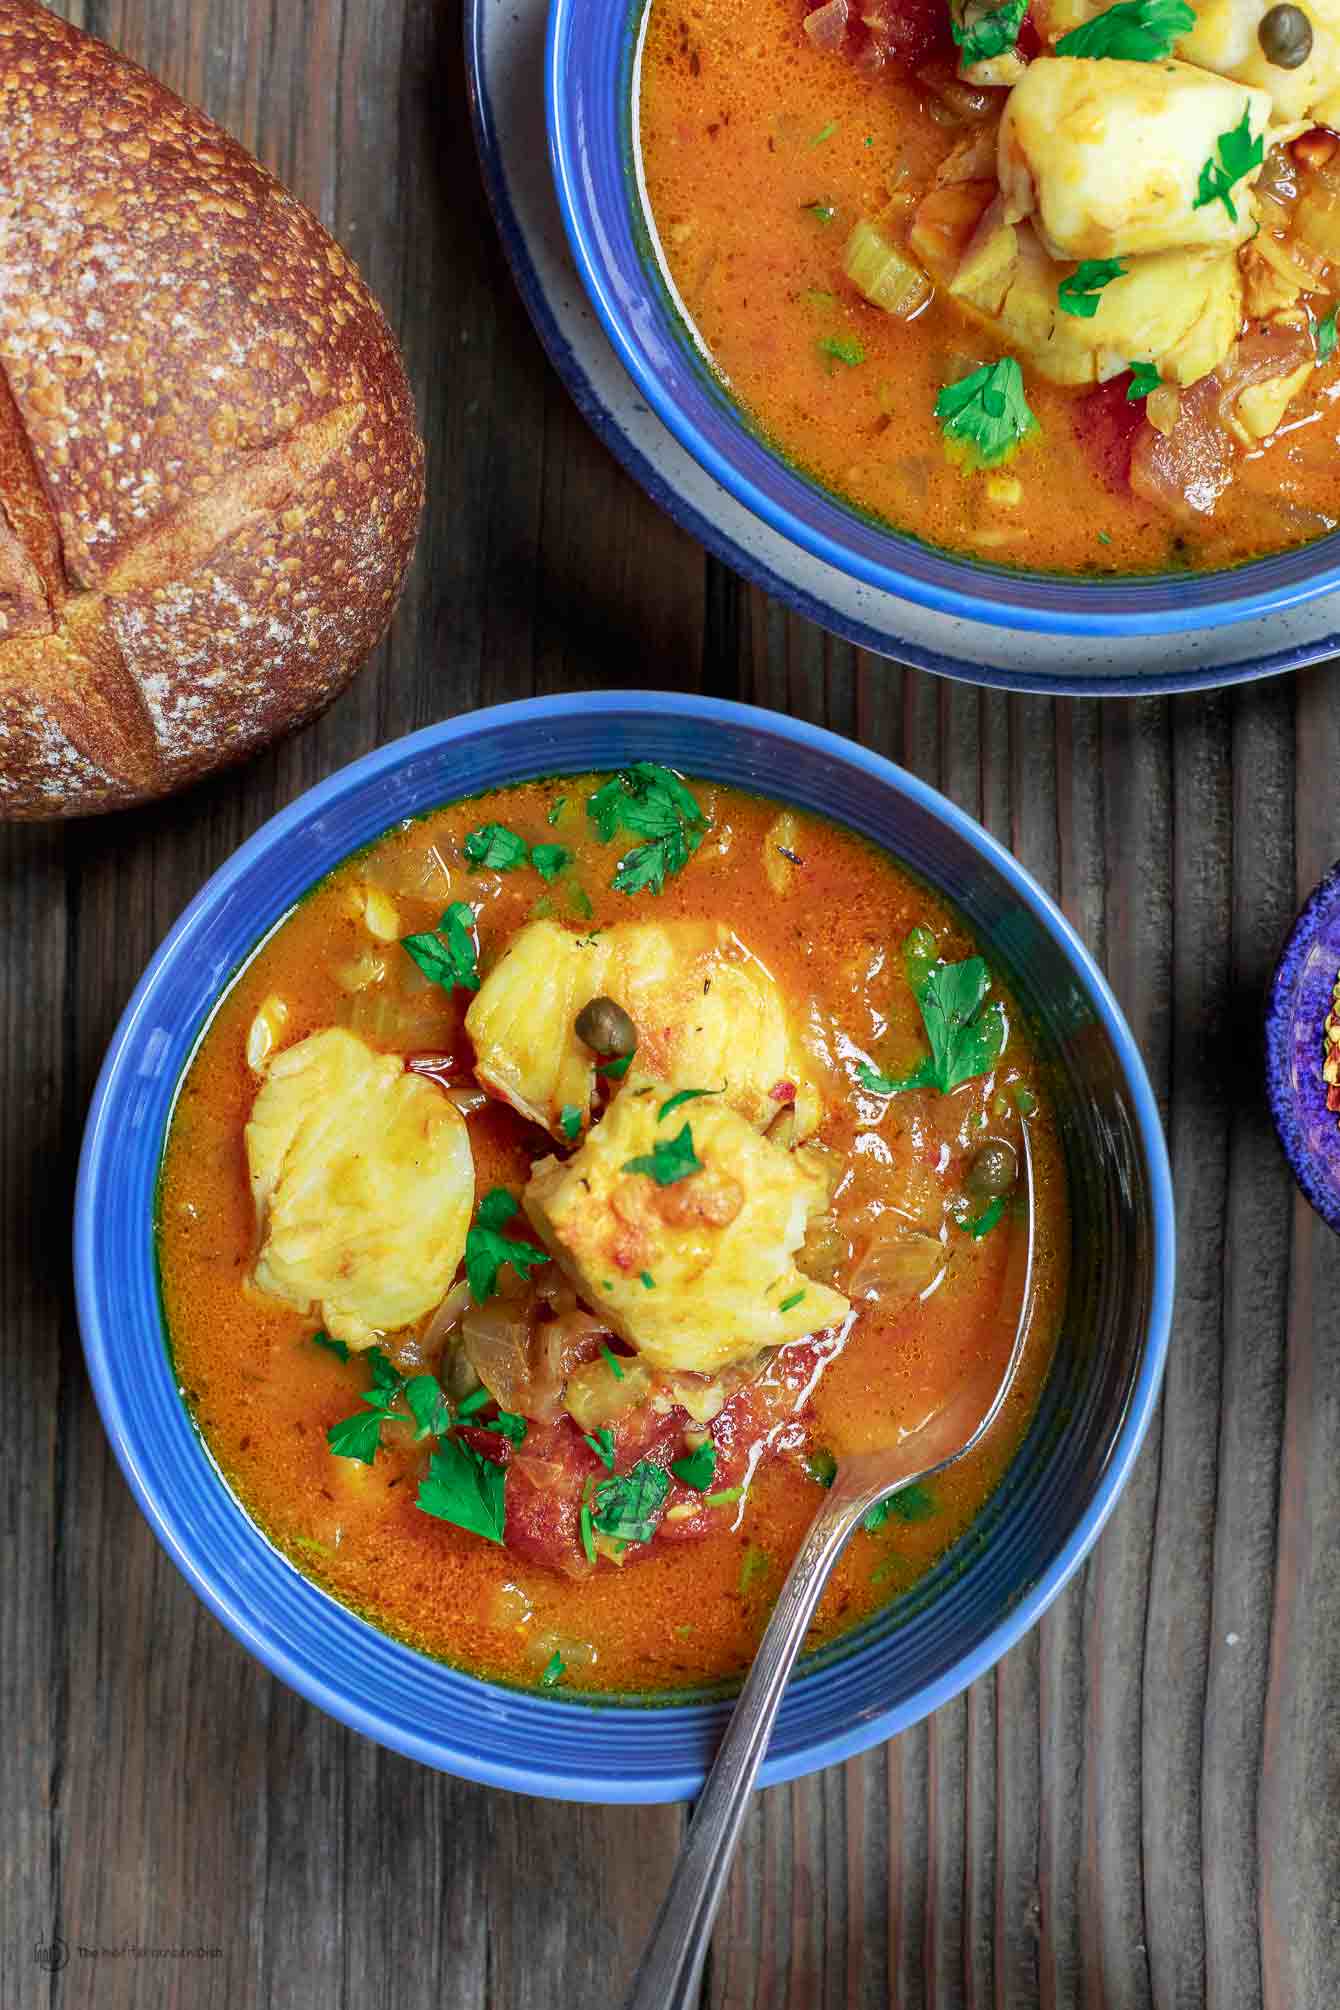 Fish stew served with a side of bread